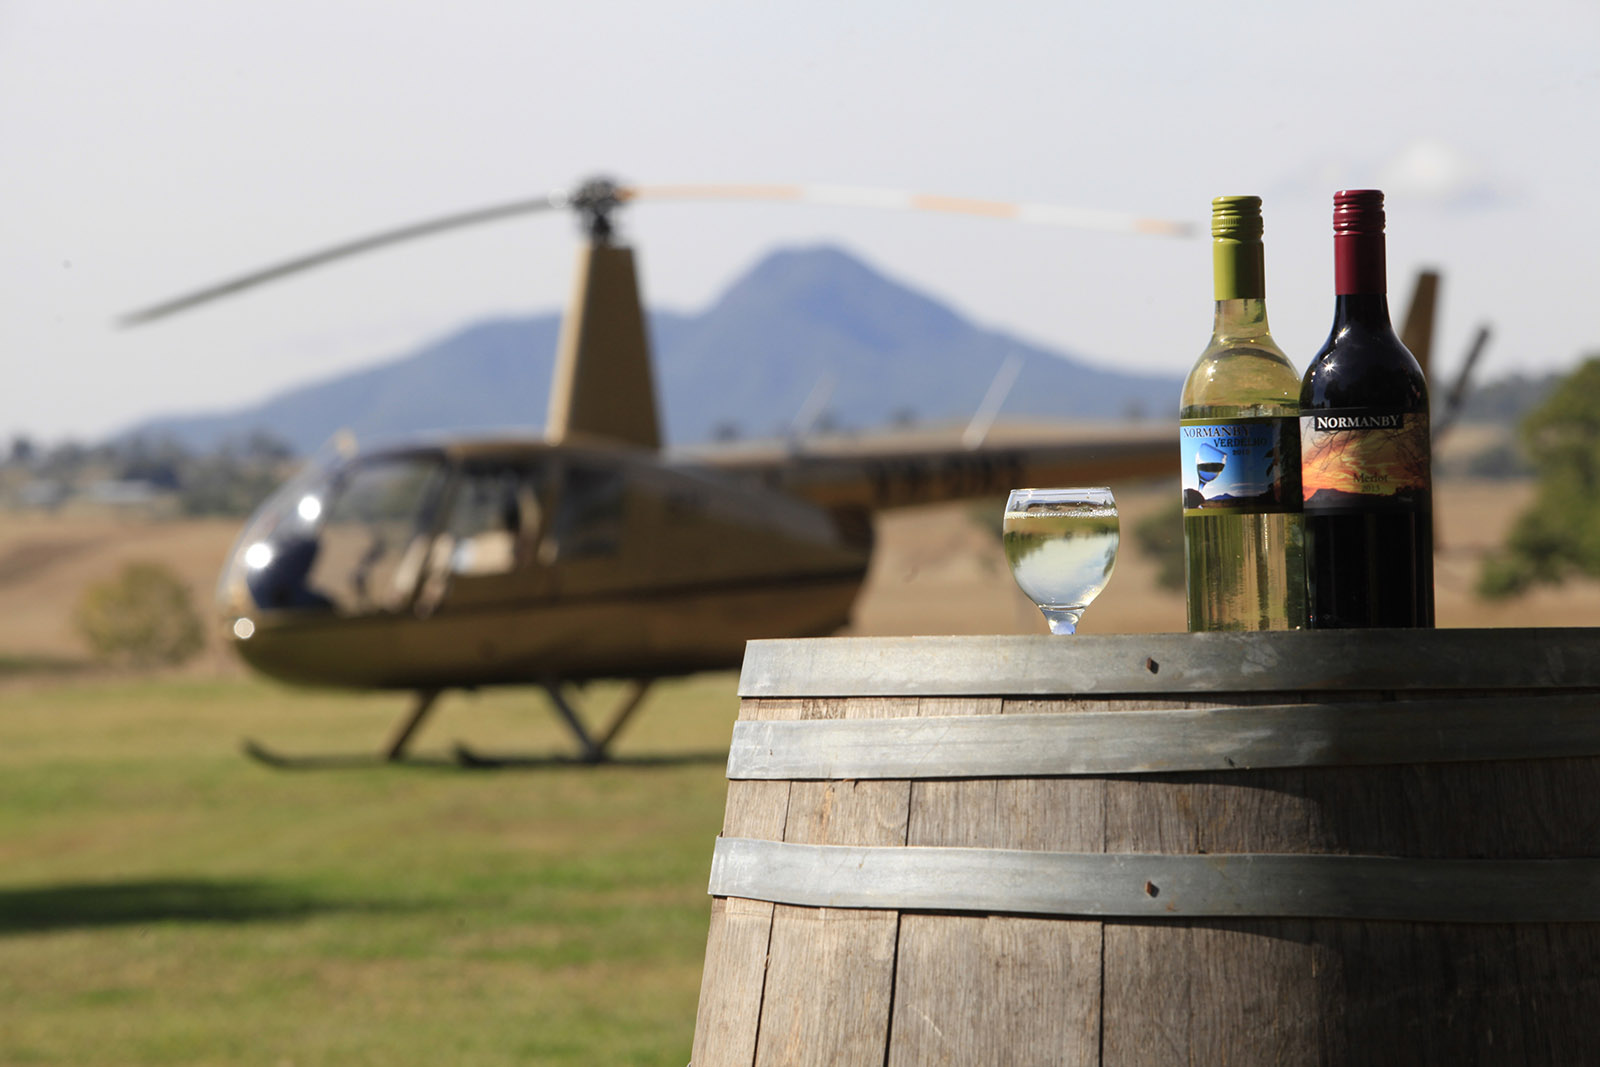 Tour nearby wineries by helicopter from Ipswich with Pterodactyl Helicopters | 10 top things to do in Ipswich